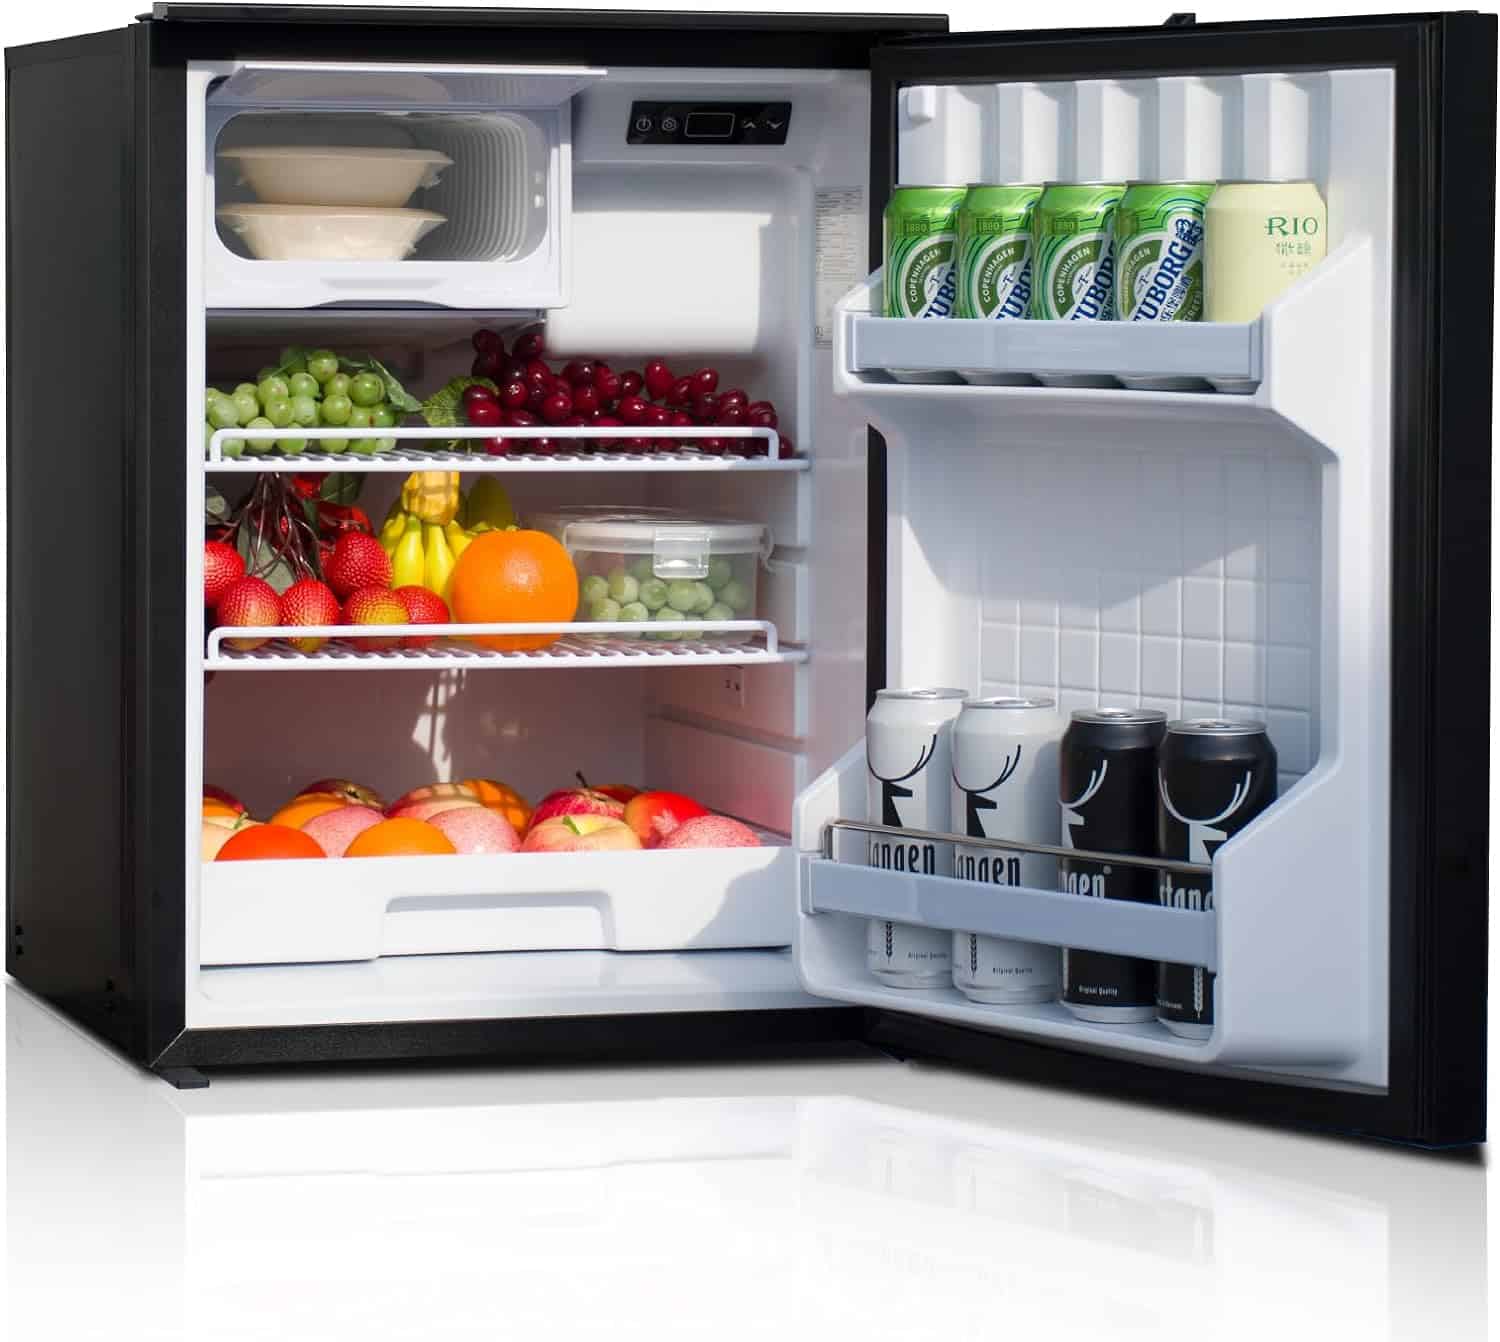 Refrigerators for Off-Grid Roundup